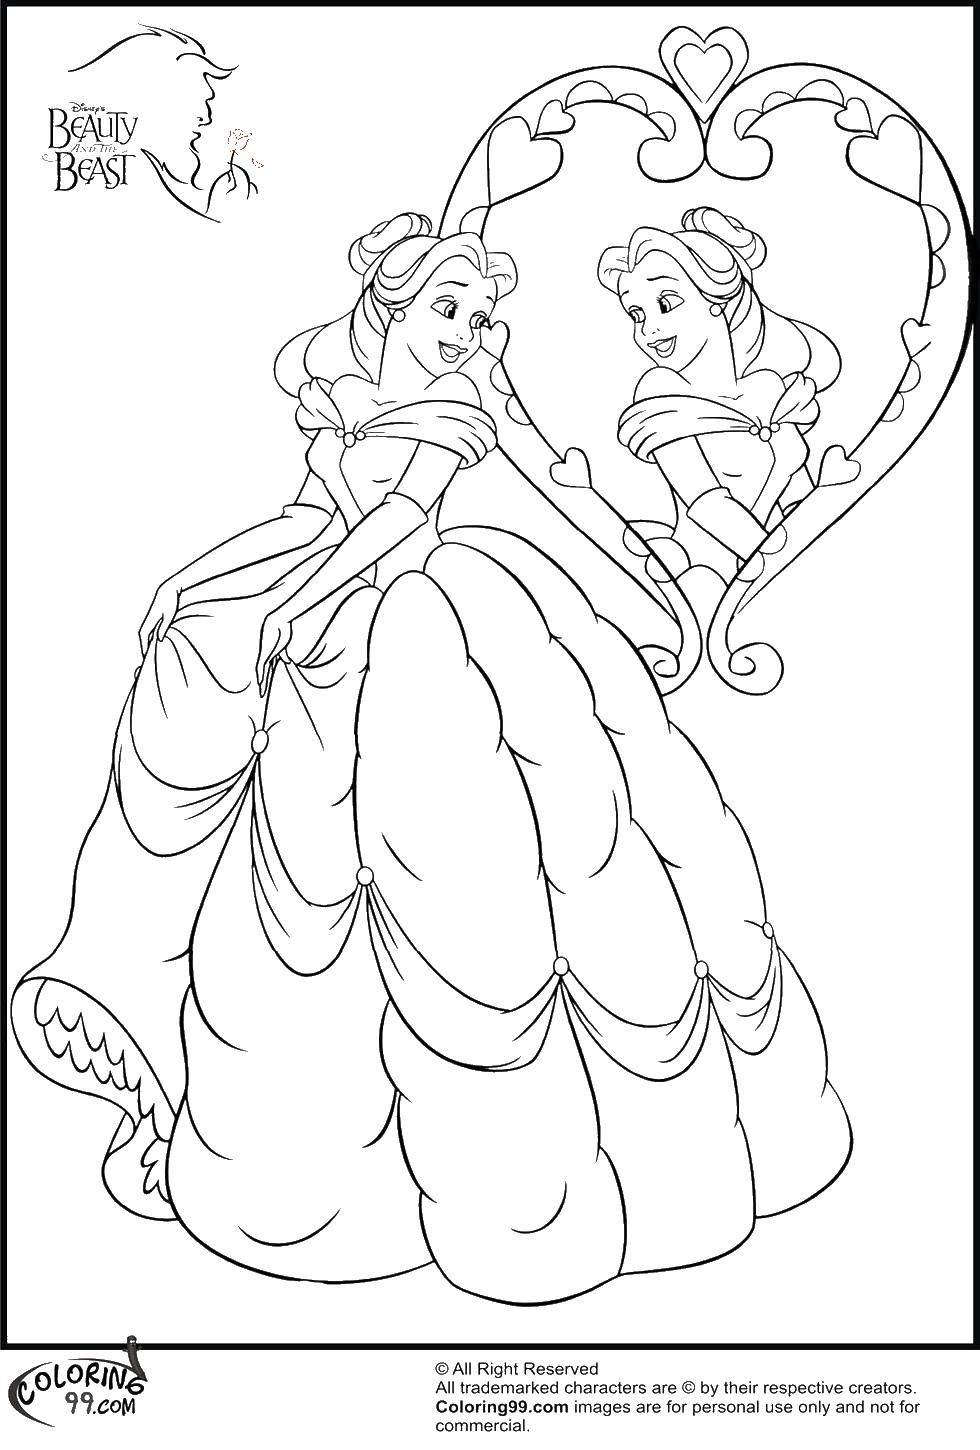 Coloring Belle looks gorgeous. Category beauty and the beast. Tags:  Beauty and the Beast, Disney.